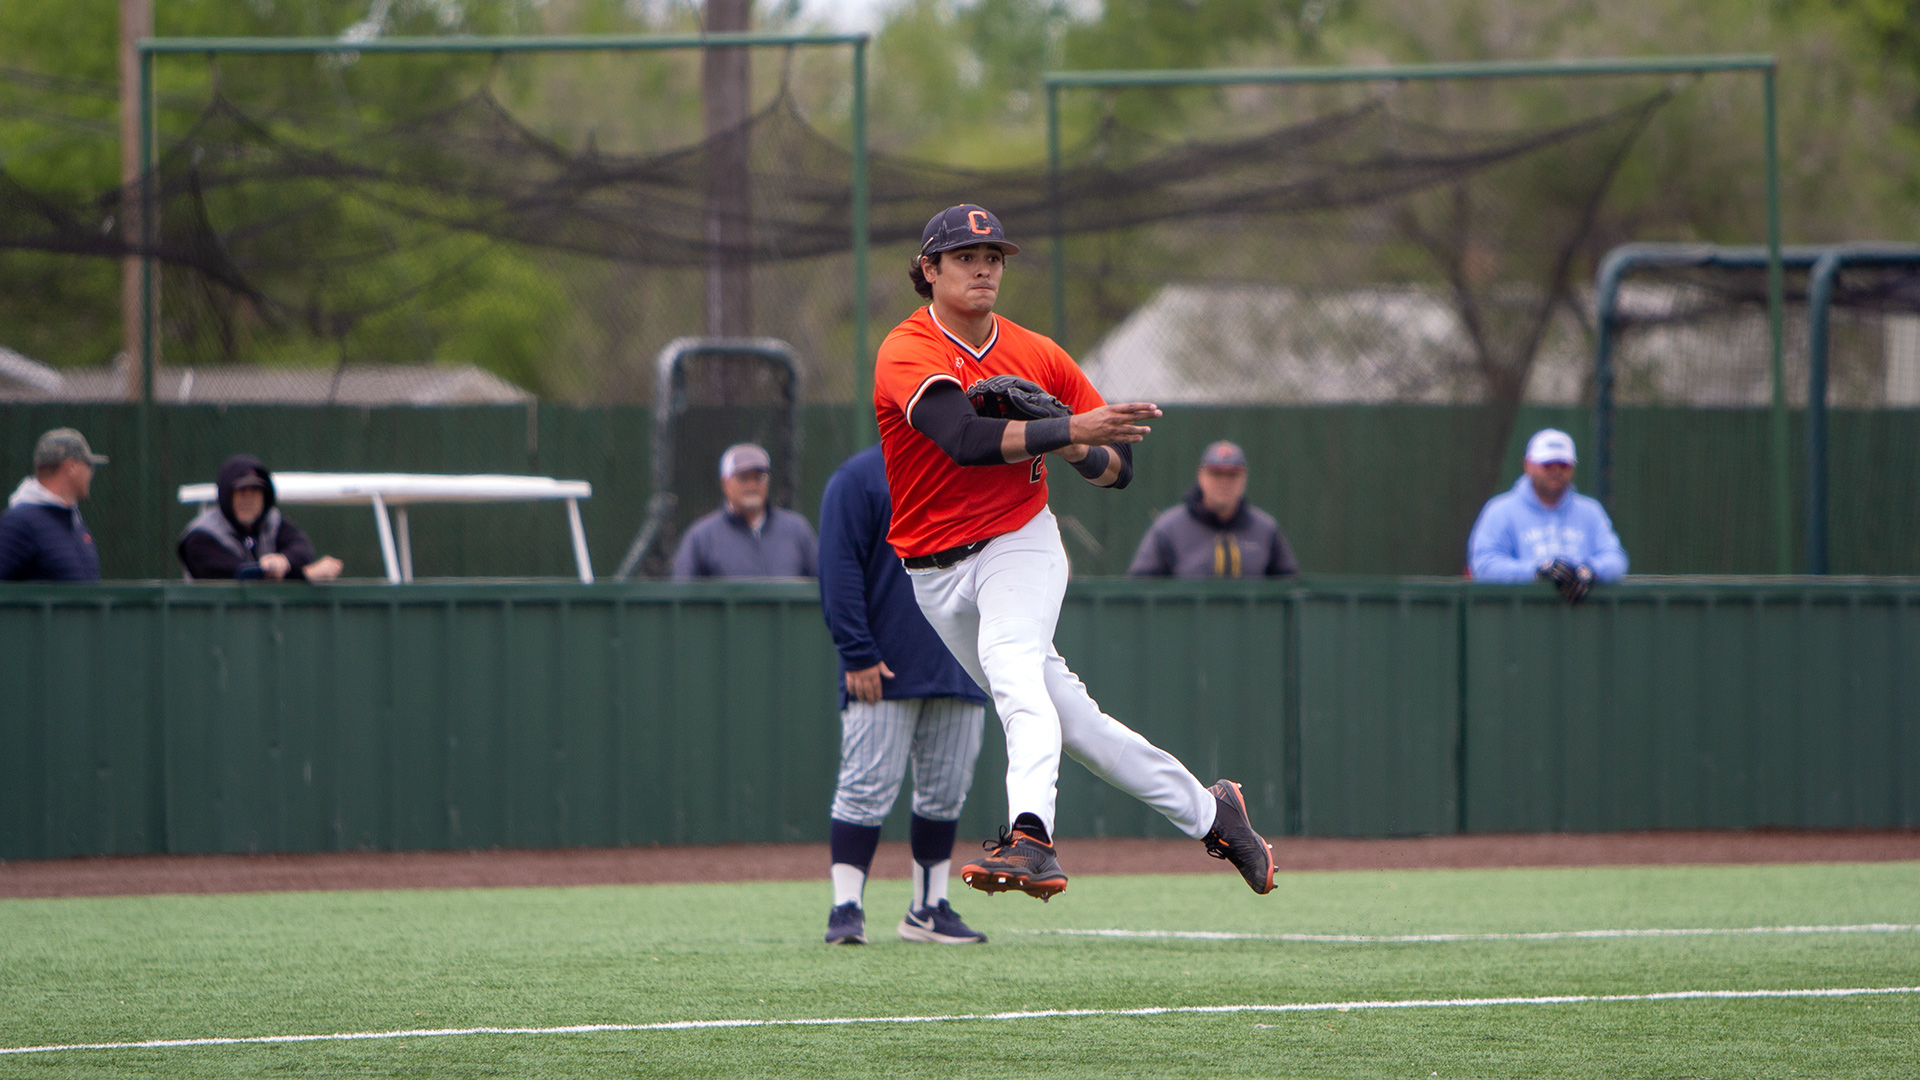 Tiger baseball team gets blanked as Cavaliers sweep four-game series